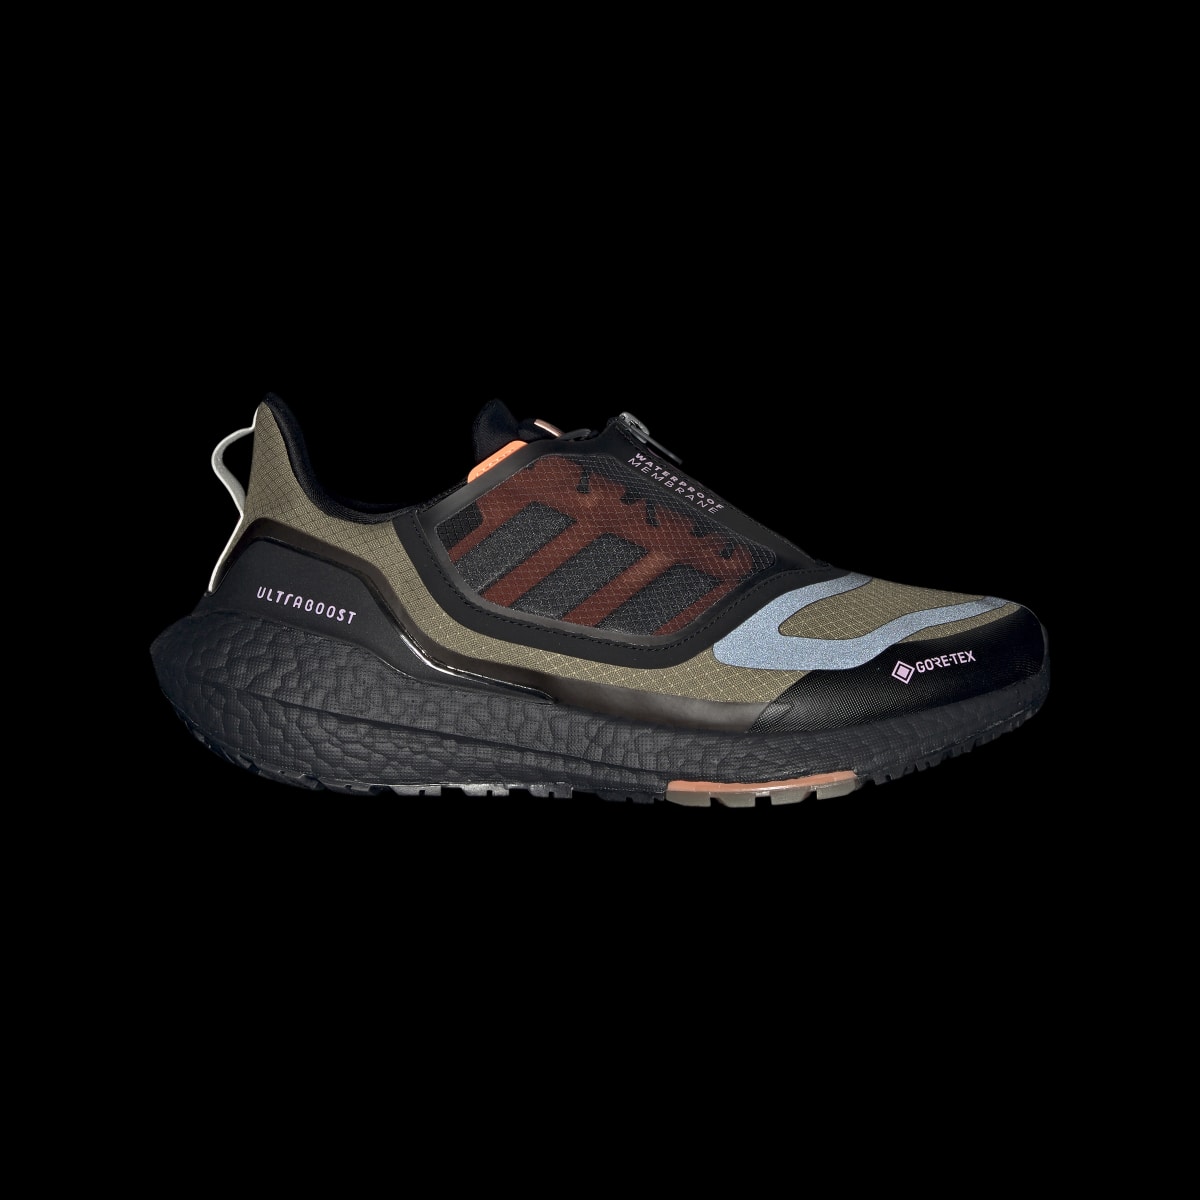 Adidas Ultraboost 22 GORE-TEX Shoes. 5